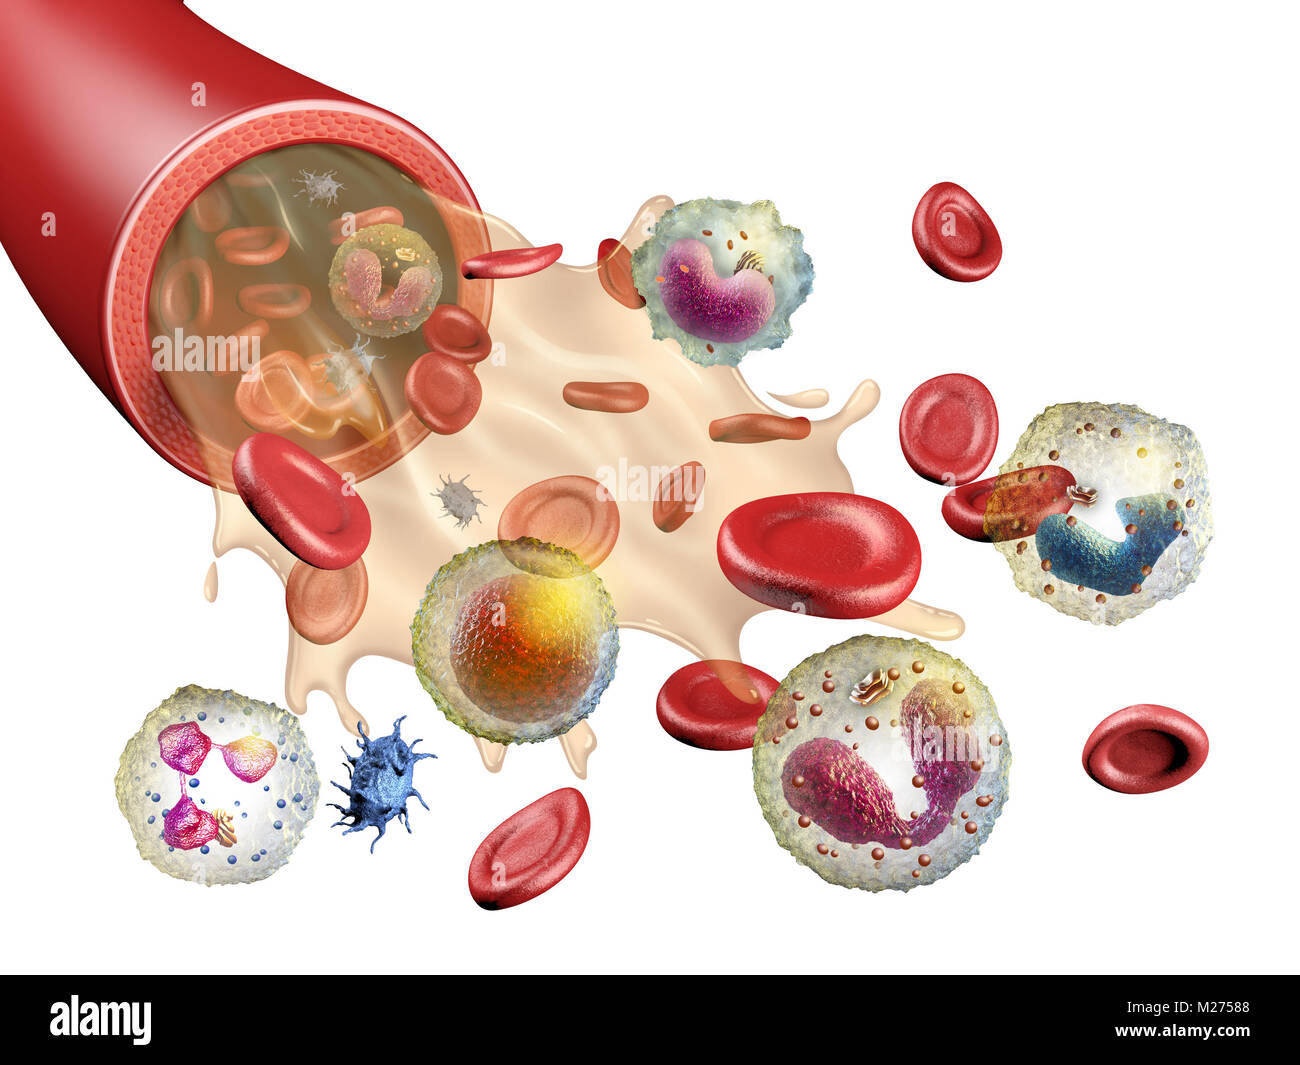 Different elements of human blood. 3d illustration. Stock Photo